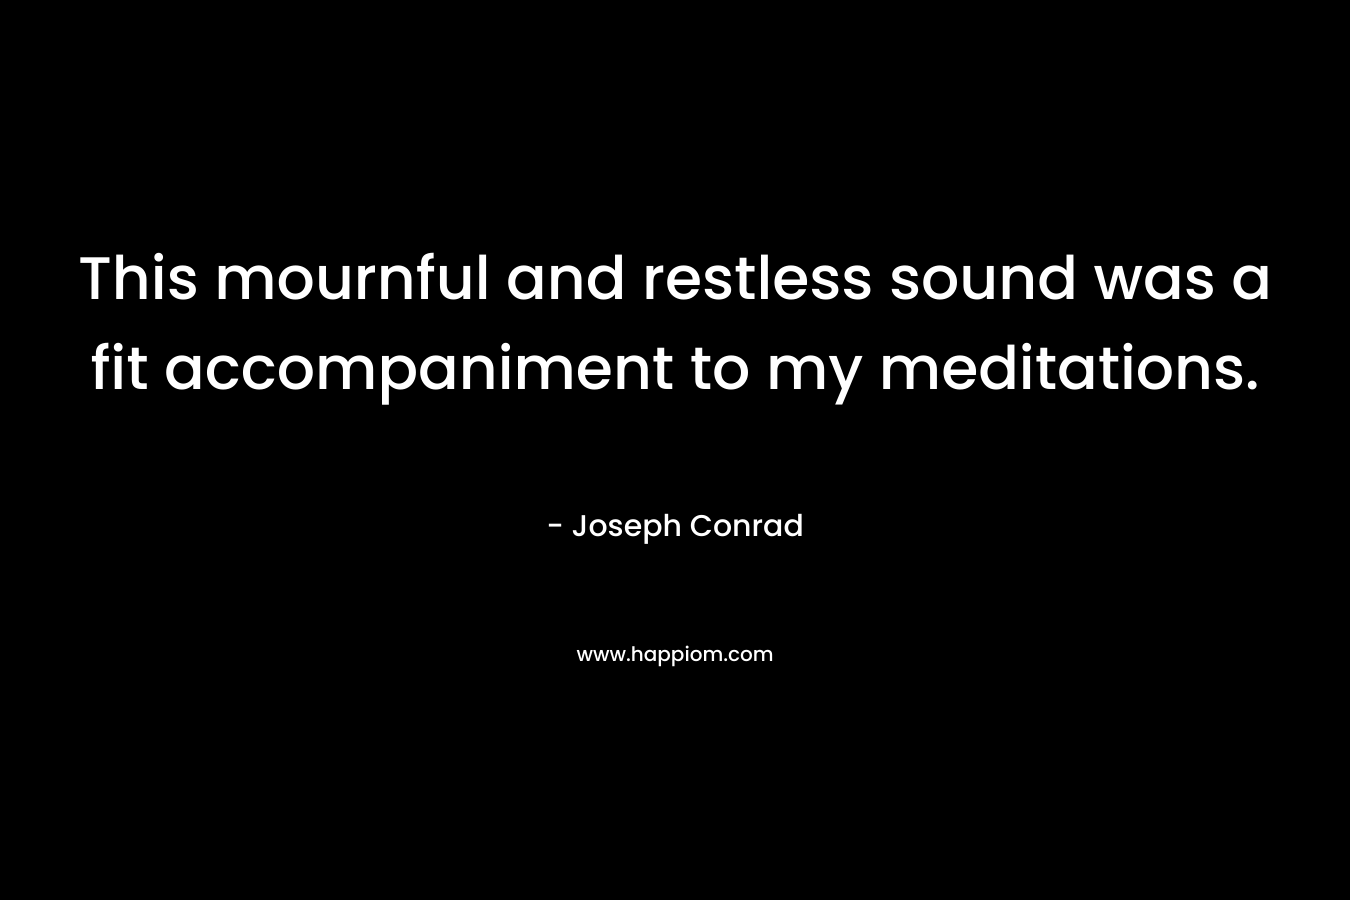 This mournful and restless sound was a fit accompaniment to my meditations. – Joseph Conrad